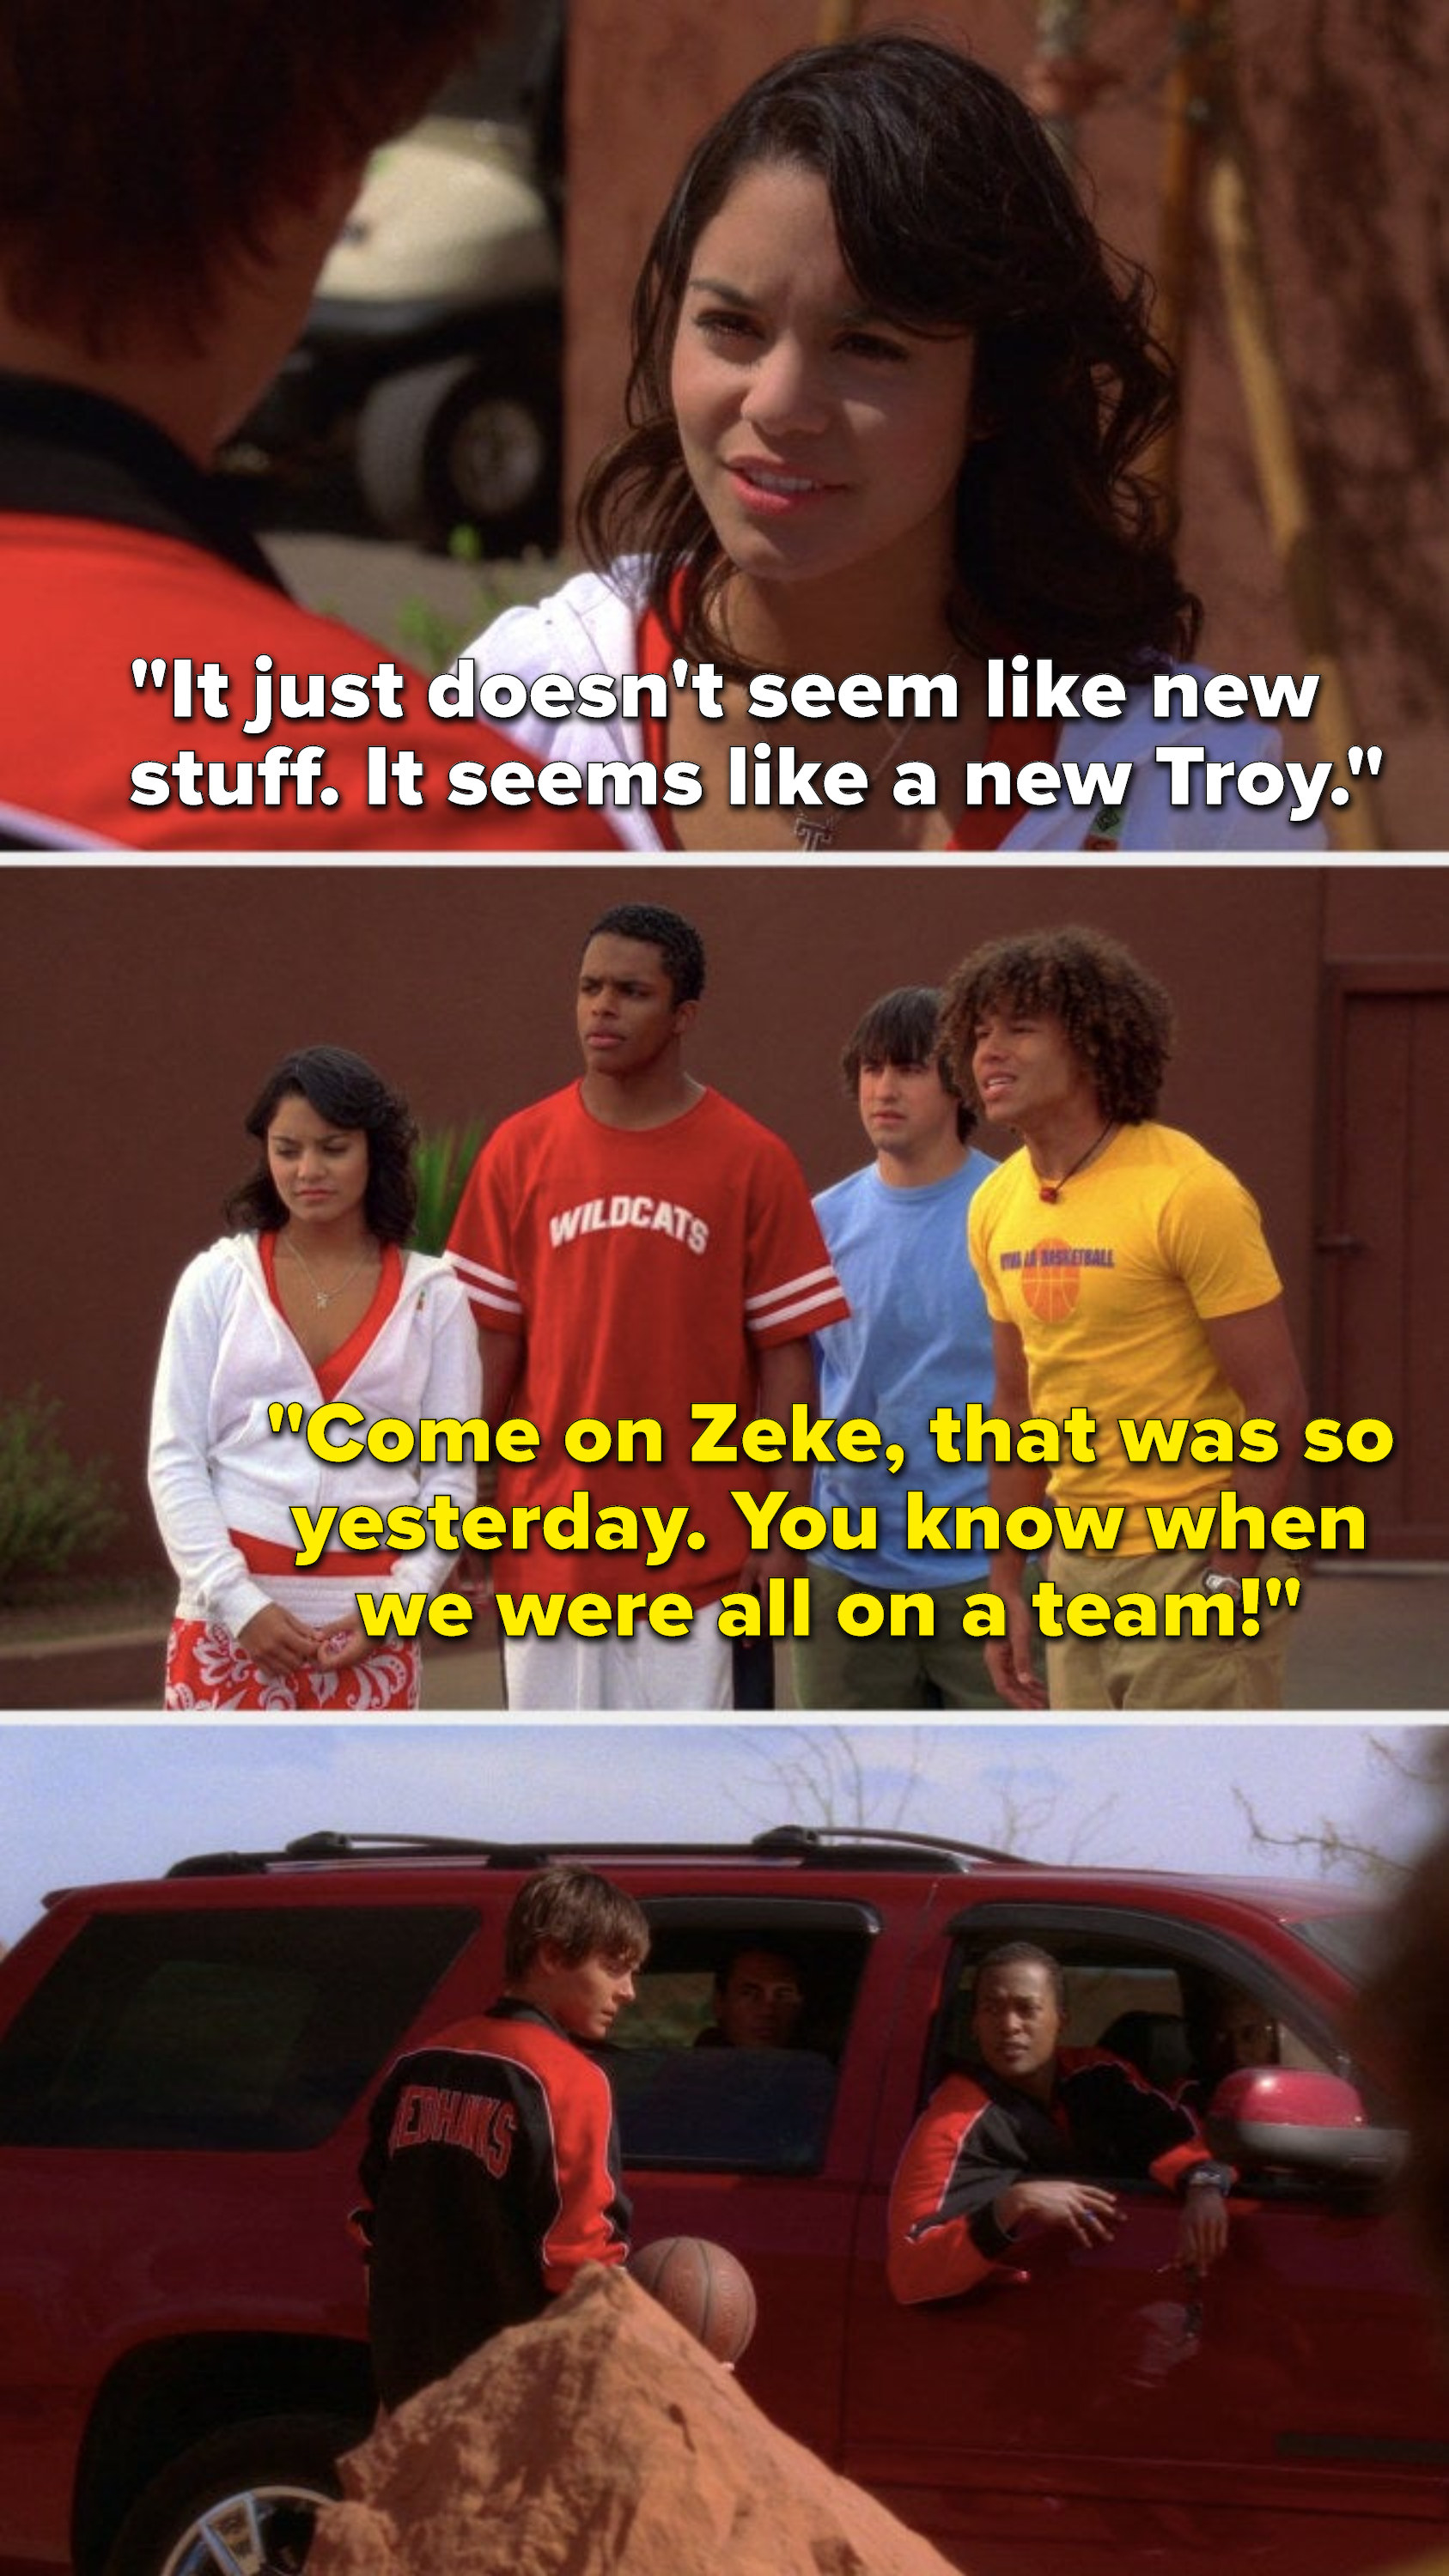 Gabriella says, &quot;It just doesn&#x27;t seem like new stuff, it seems like a new Troy,&quot; and Chad says, &quot;Come on Zeke, that was so yesterday, you know when we were all on a team&quot;